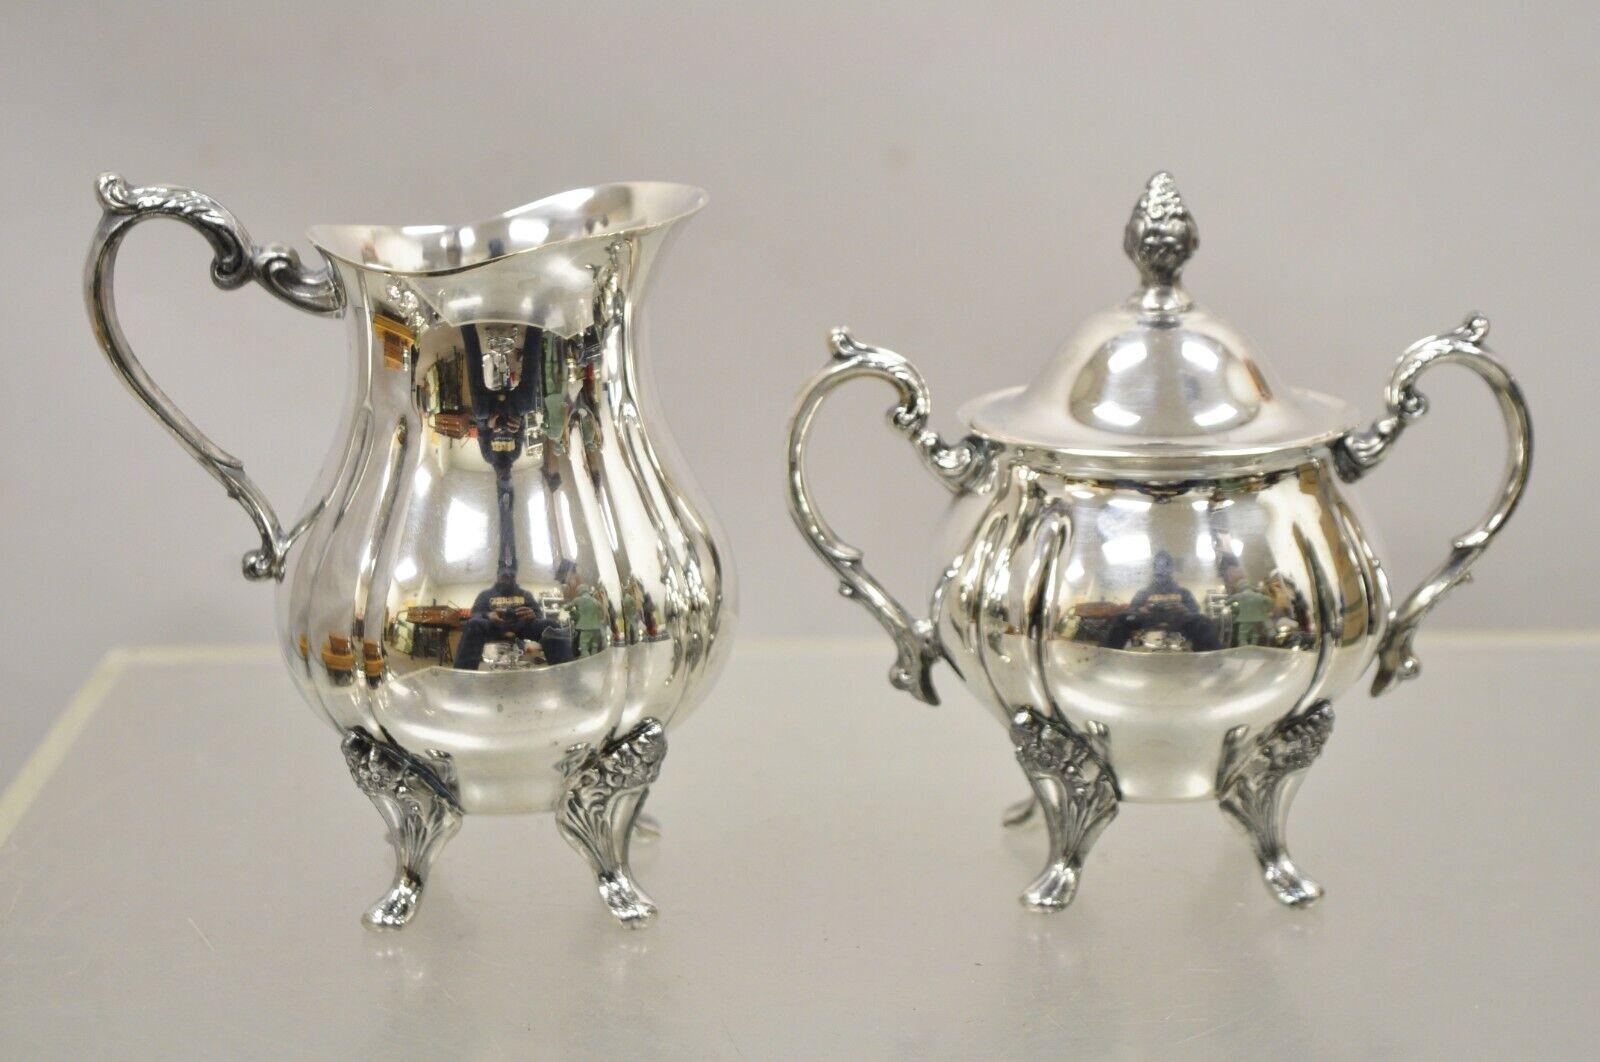 Antique English Victorian Silver Plated Coffee Tea Set, 4 Pc Set In Good Condition For Sale In Philadelphia, PA